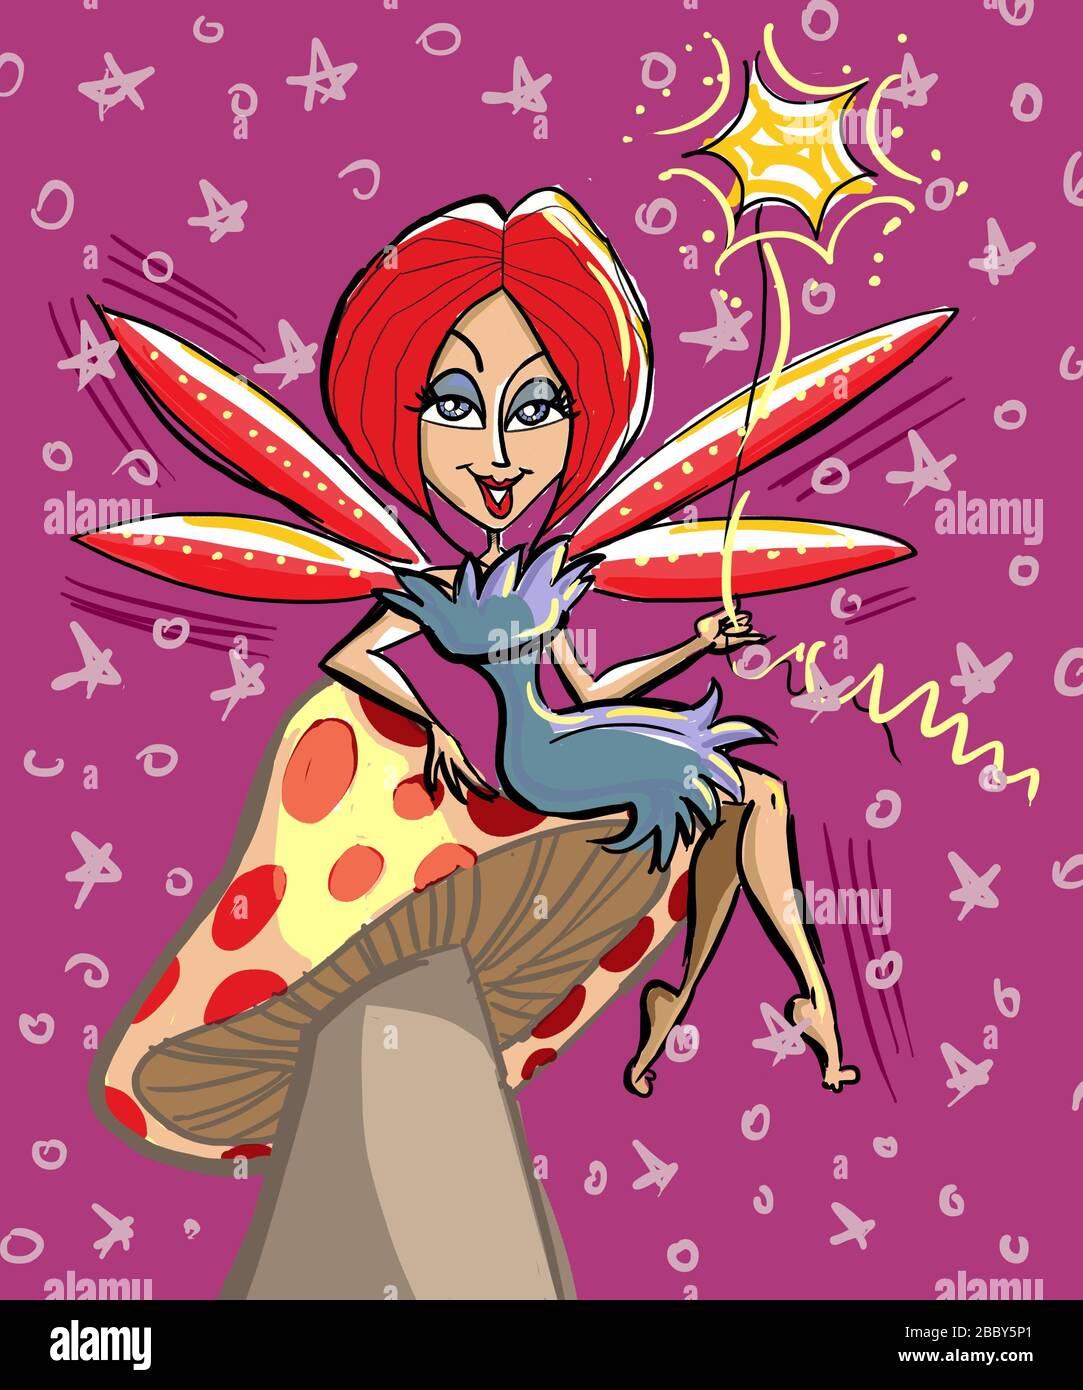 A winged fairy sitting on a polka dot mushroom on a purple background. She has red hair and holds a star on a string Stock Photo